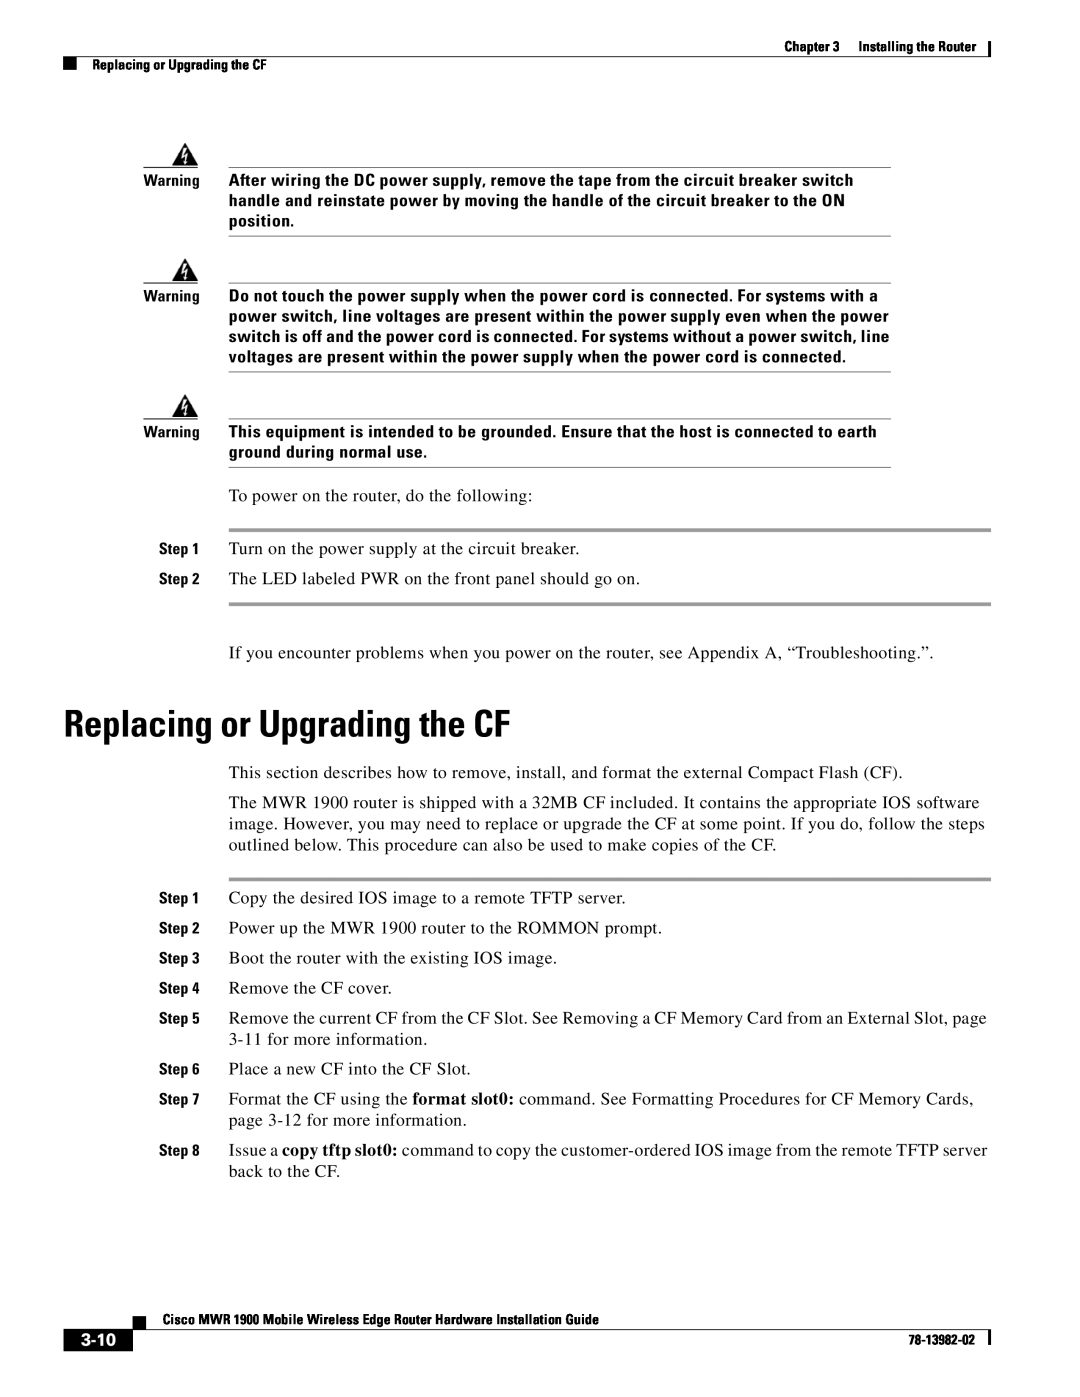 Cisco Systems MWR 1900 manual Replacing or Upgrading the CF, 3-10 